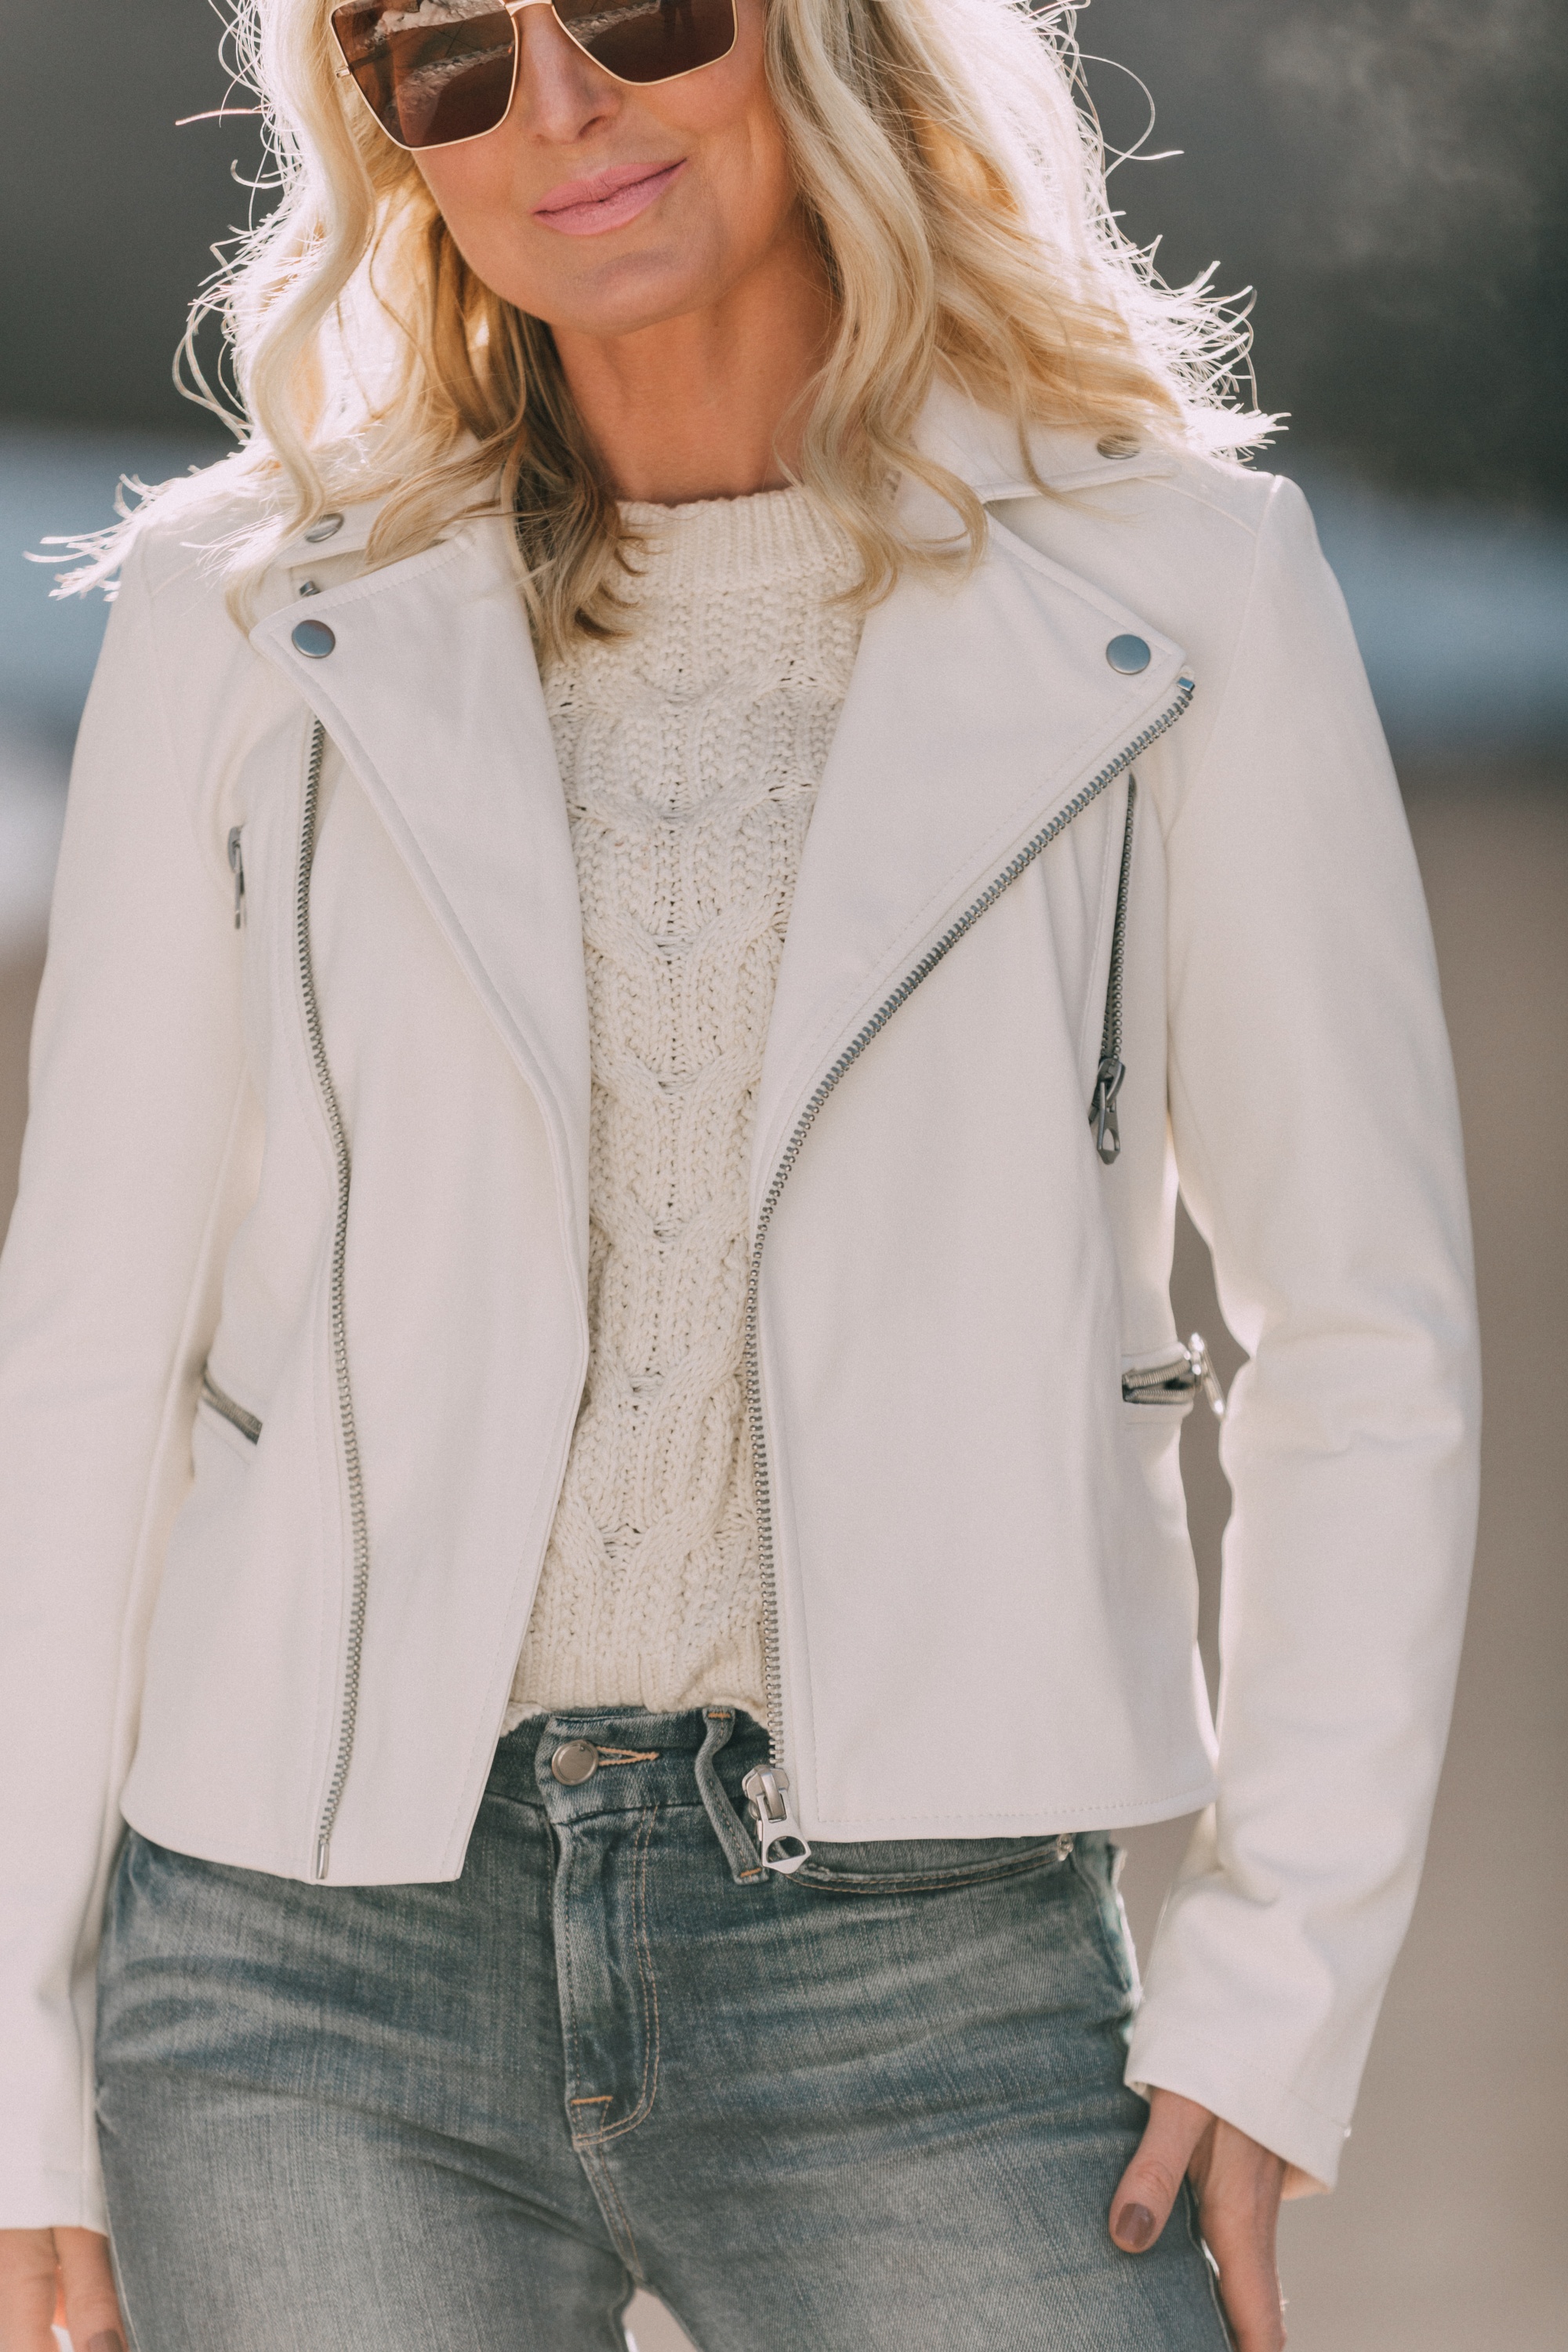 Winter White pieces from walmart by Scoop on Fashion blogger Erin Busbee of BusbeeStyle.com wearing a white faux leather moto jacket by Scoop in Telluride, Colorado